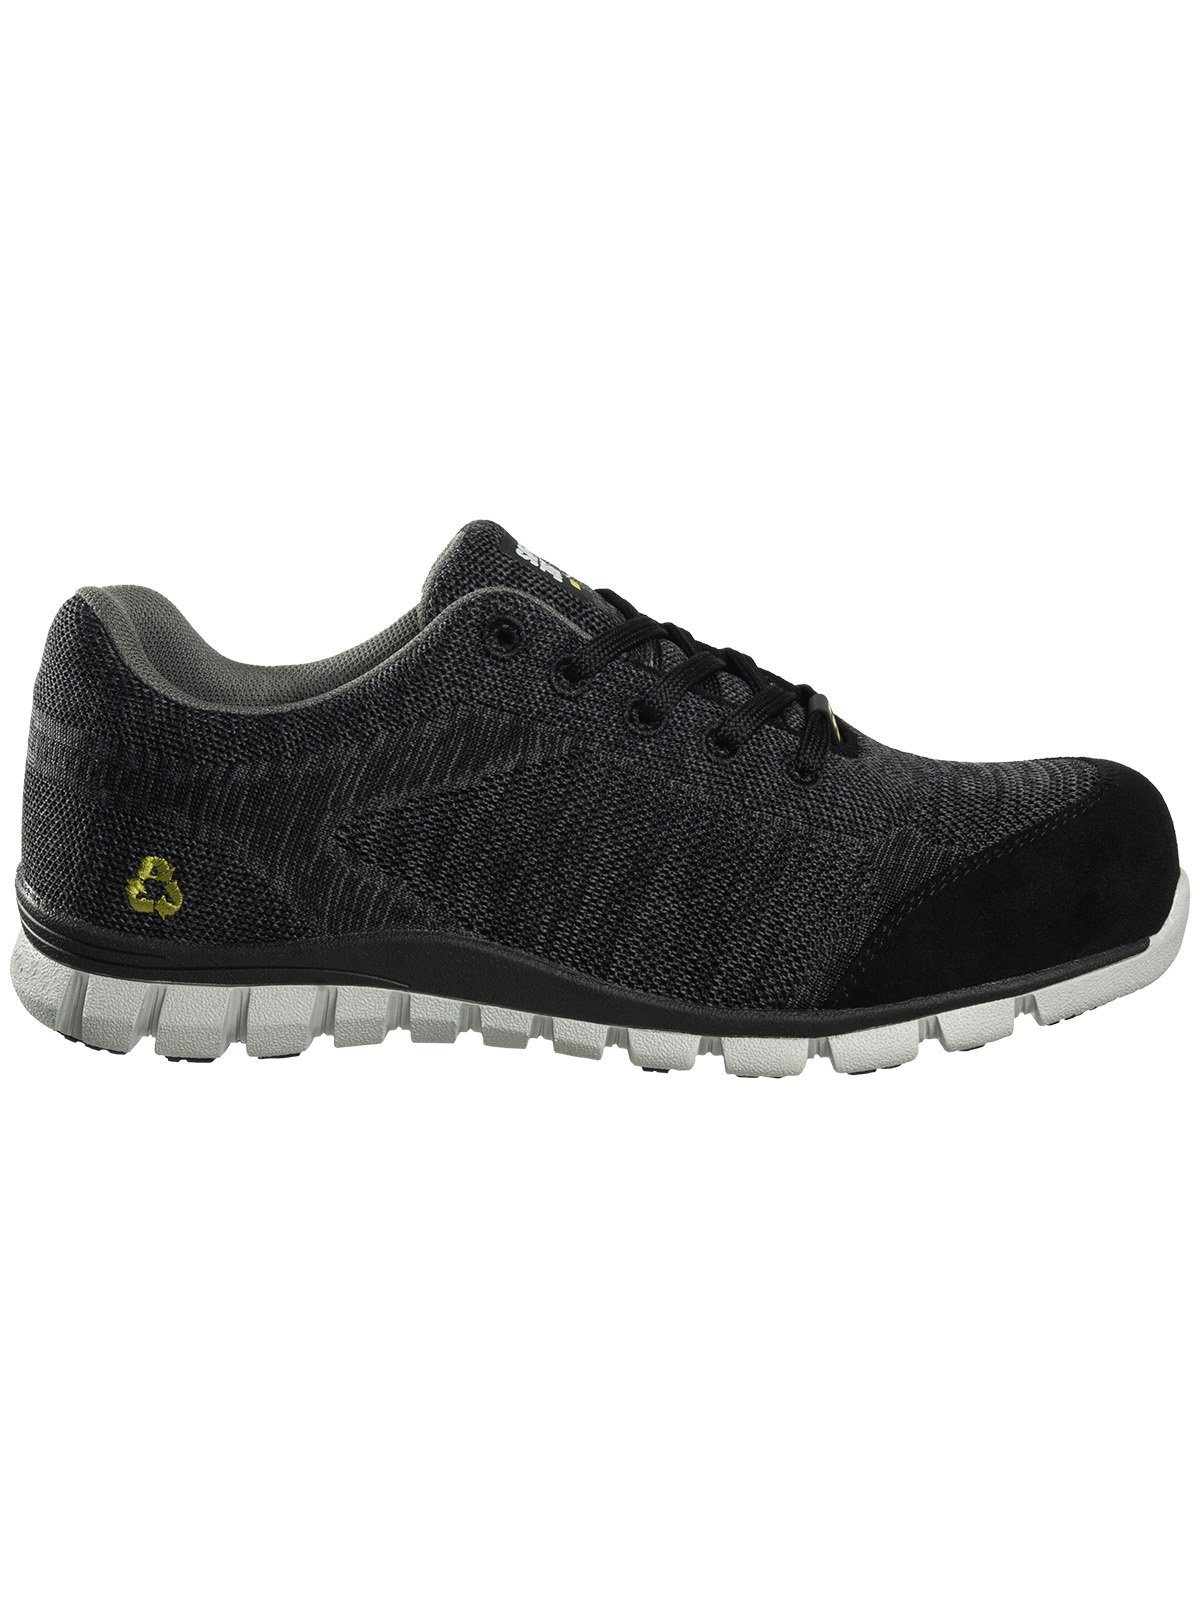 S1P Jogger SafetyJogger Safety Morris Arbeitsschuh